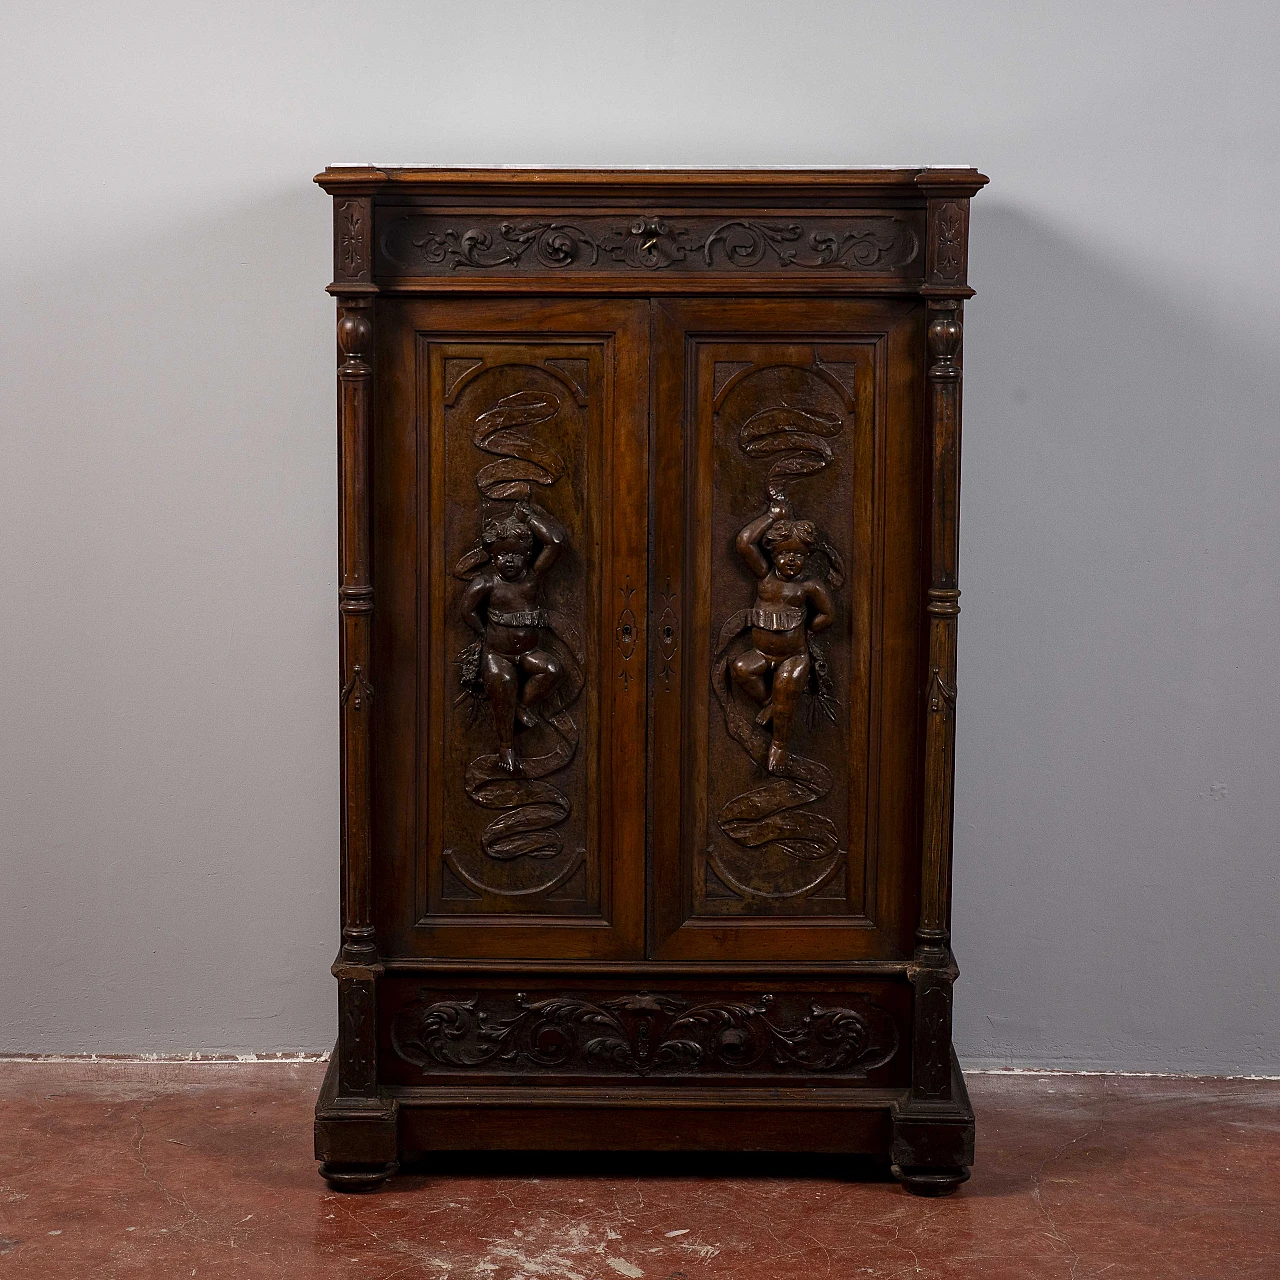 Wood secrétaire with carvings, late 19th century 1